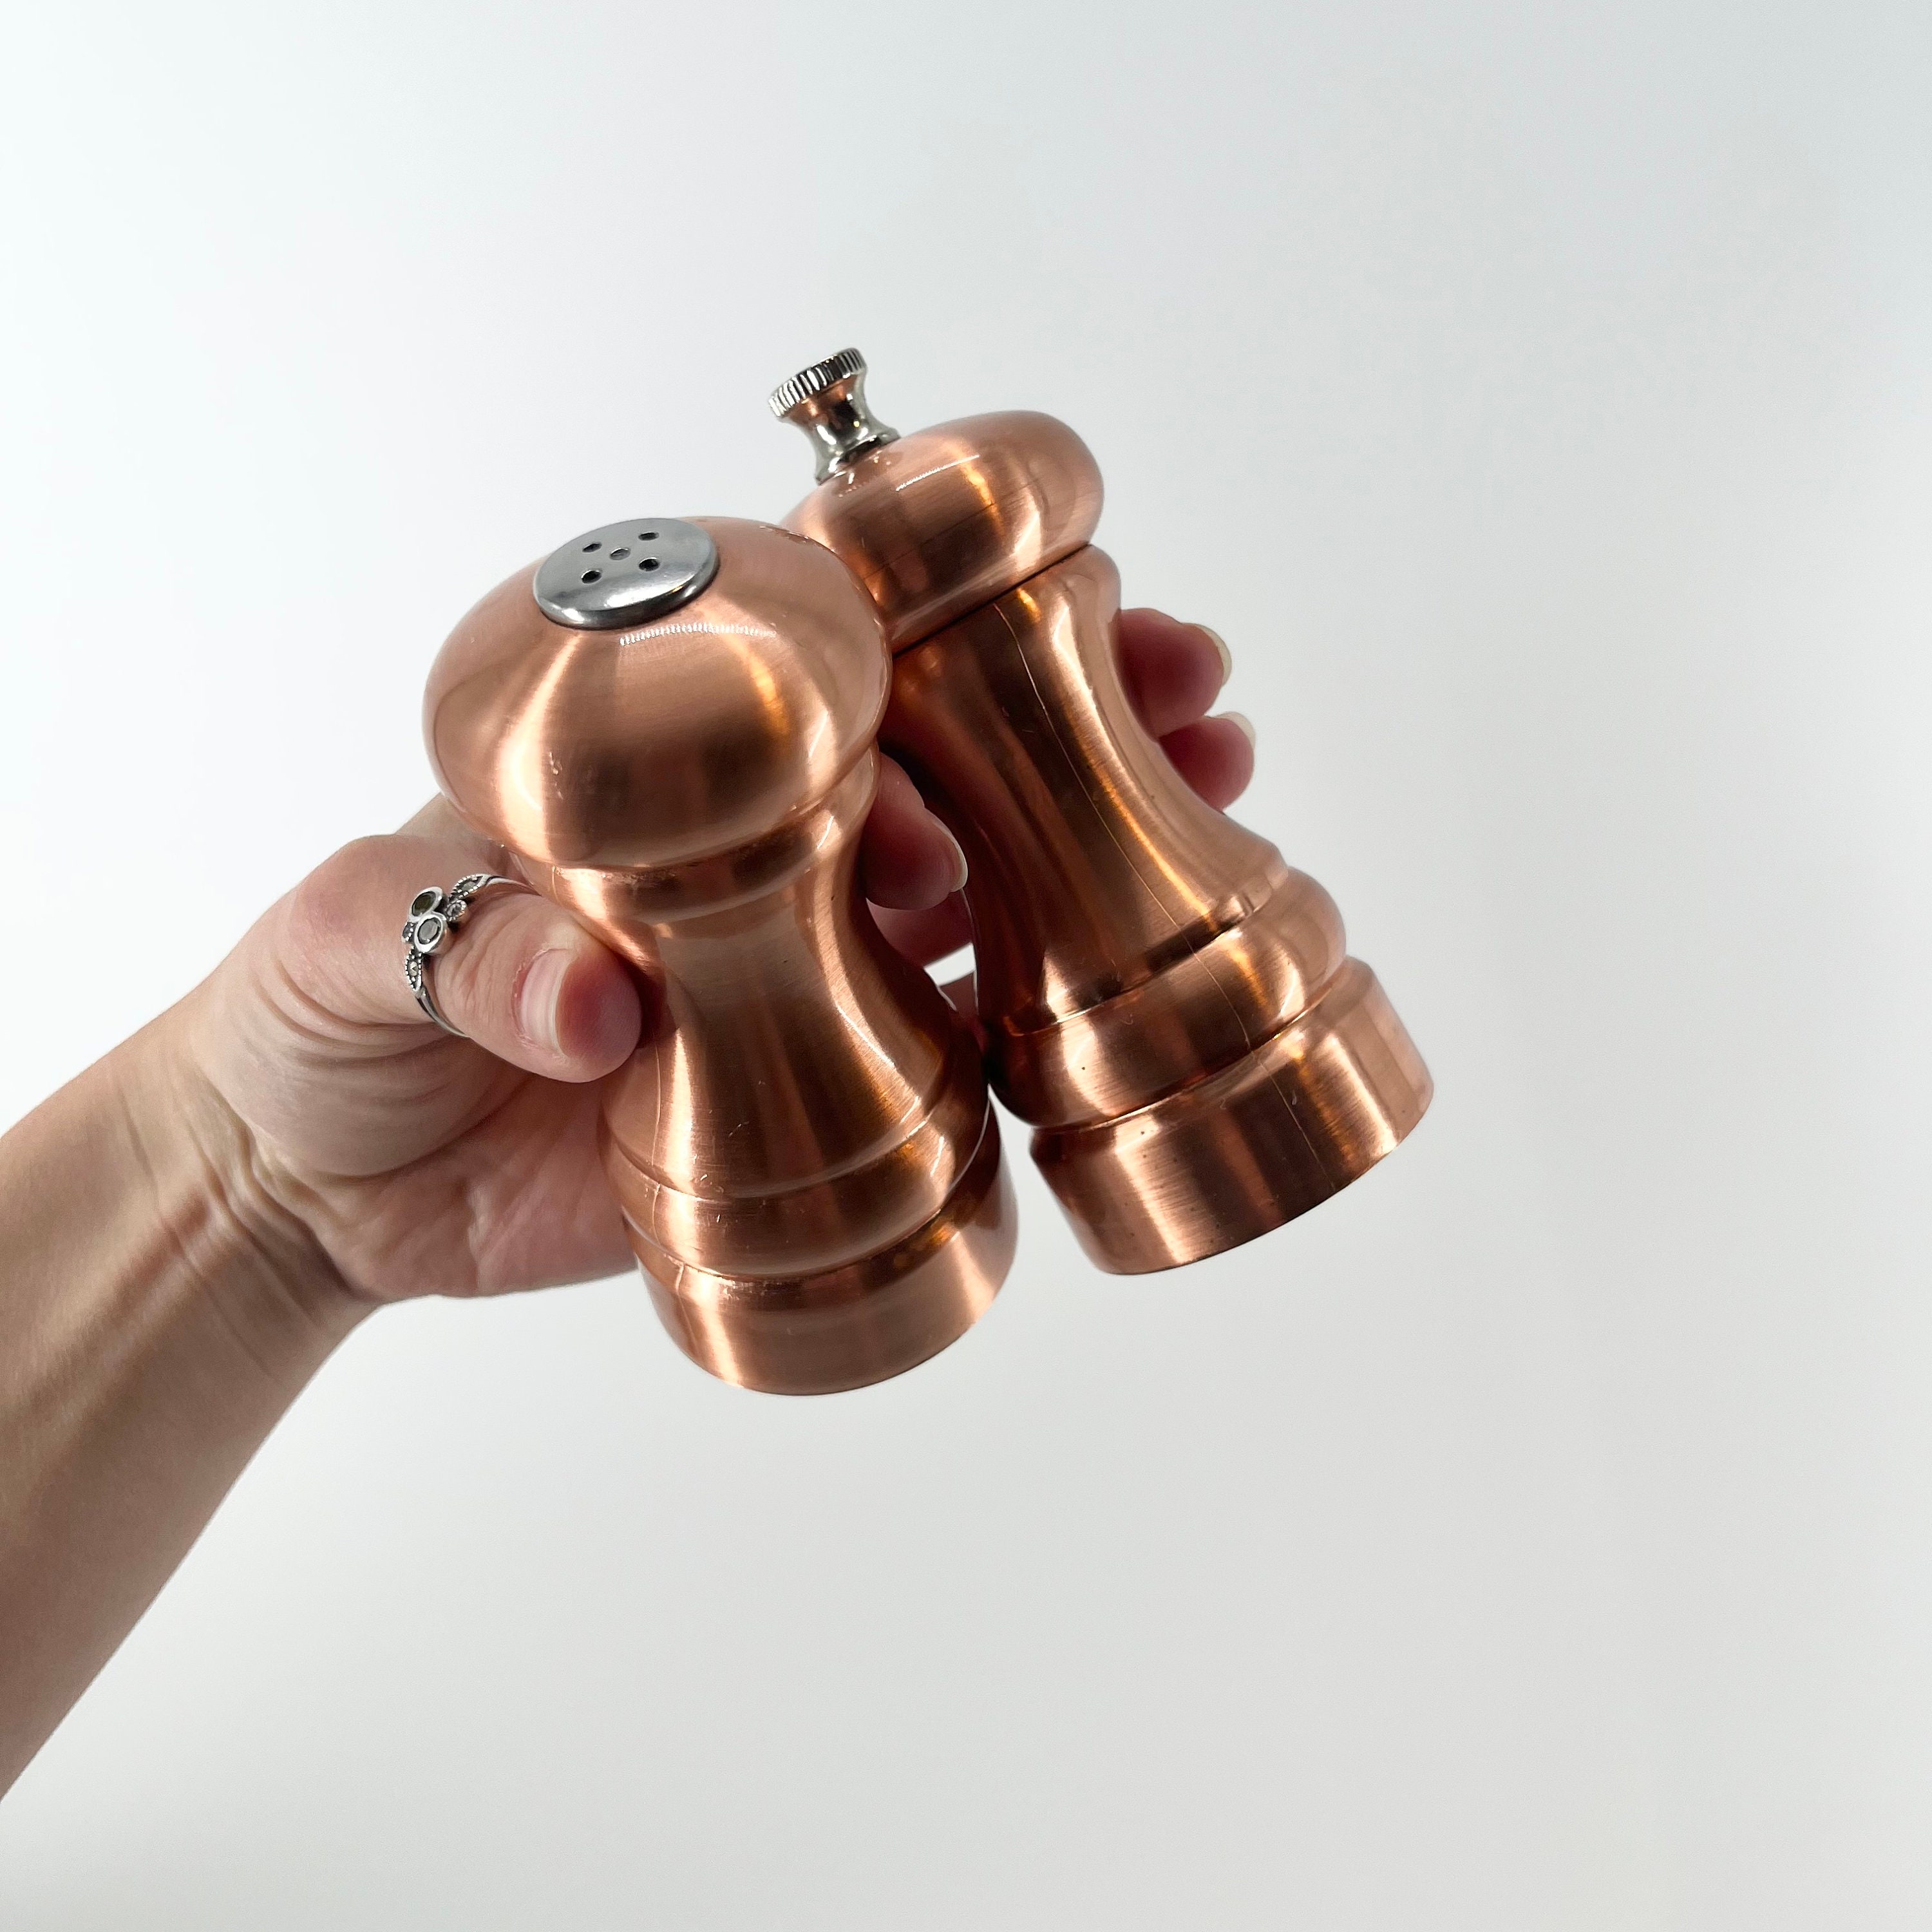 Olde Thompson Salt and Pepper Shakers Set + Reviews | Crate & Barrel